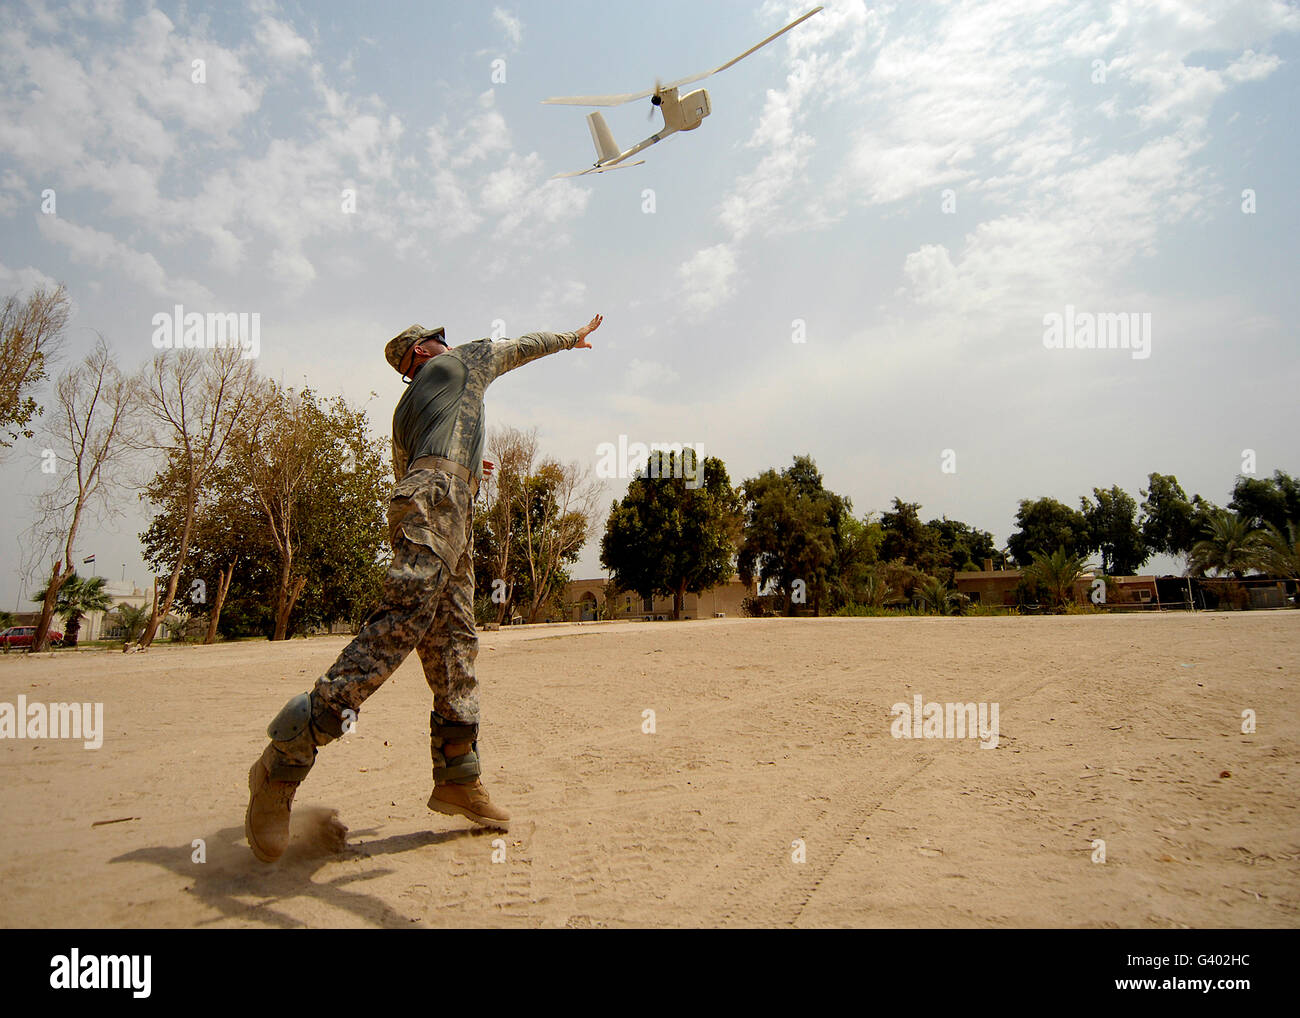 U.S. Army soldier launches an RQ-11B Raven unmanned aerial vehicle. Stock Photo